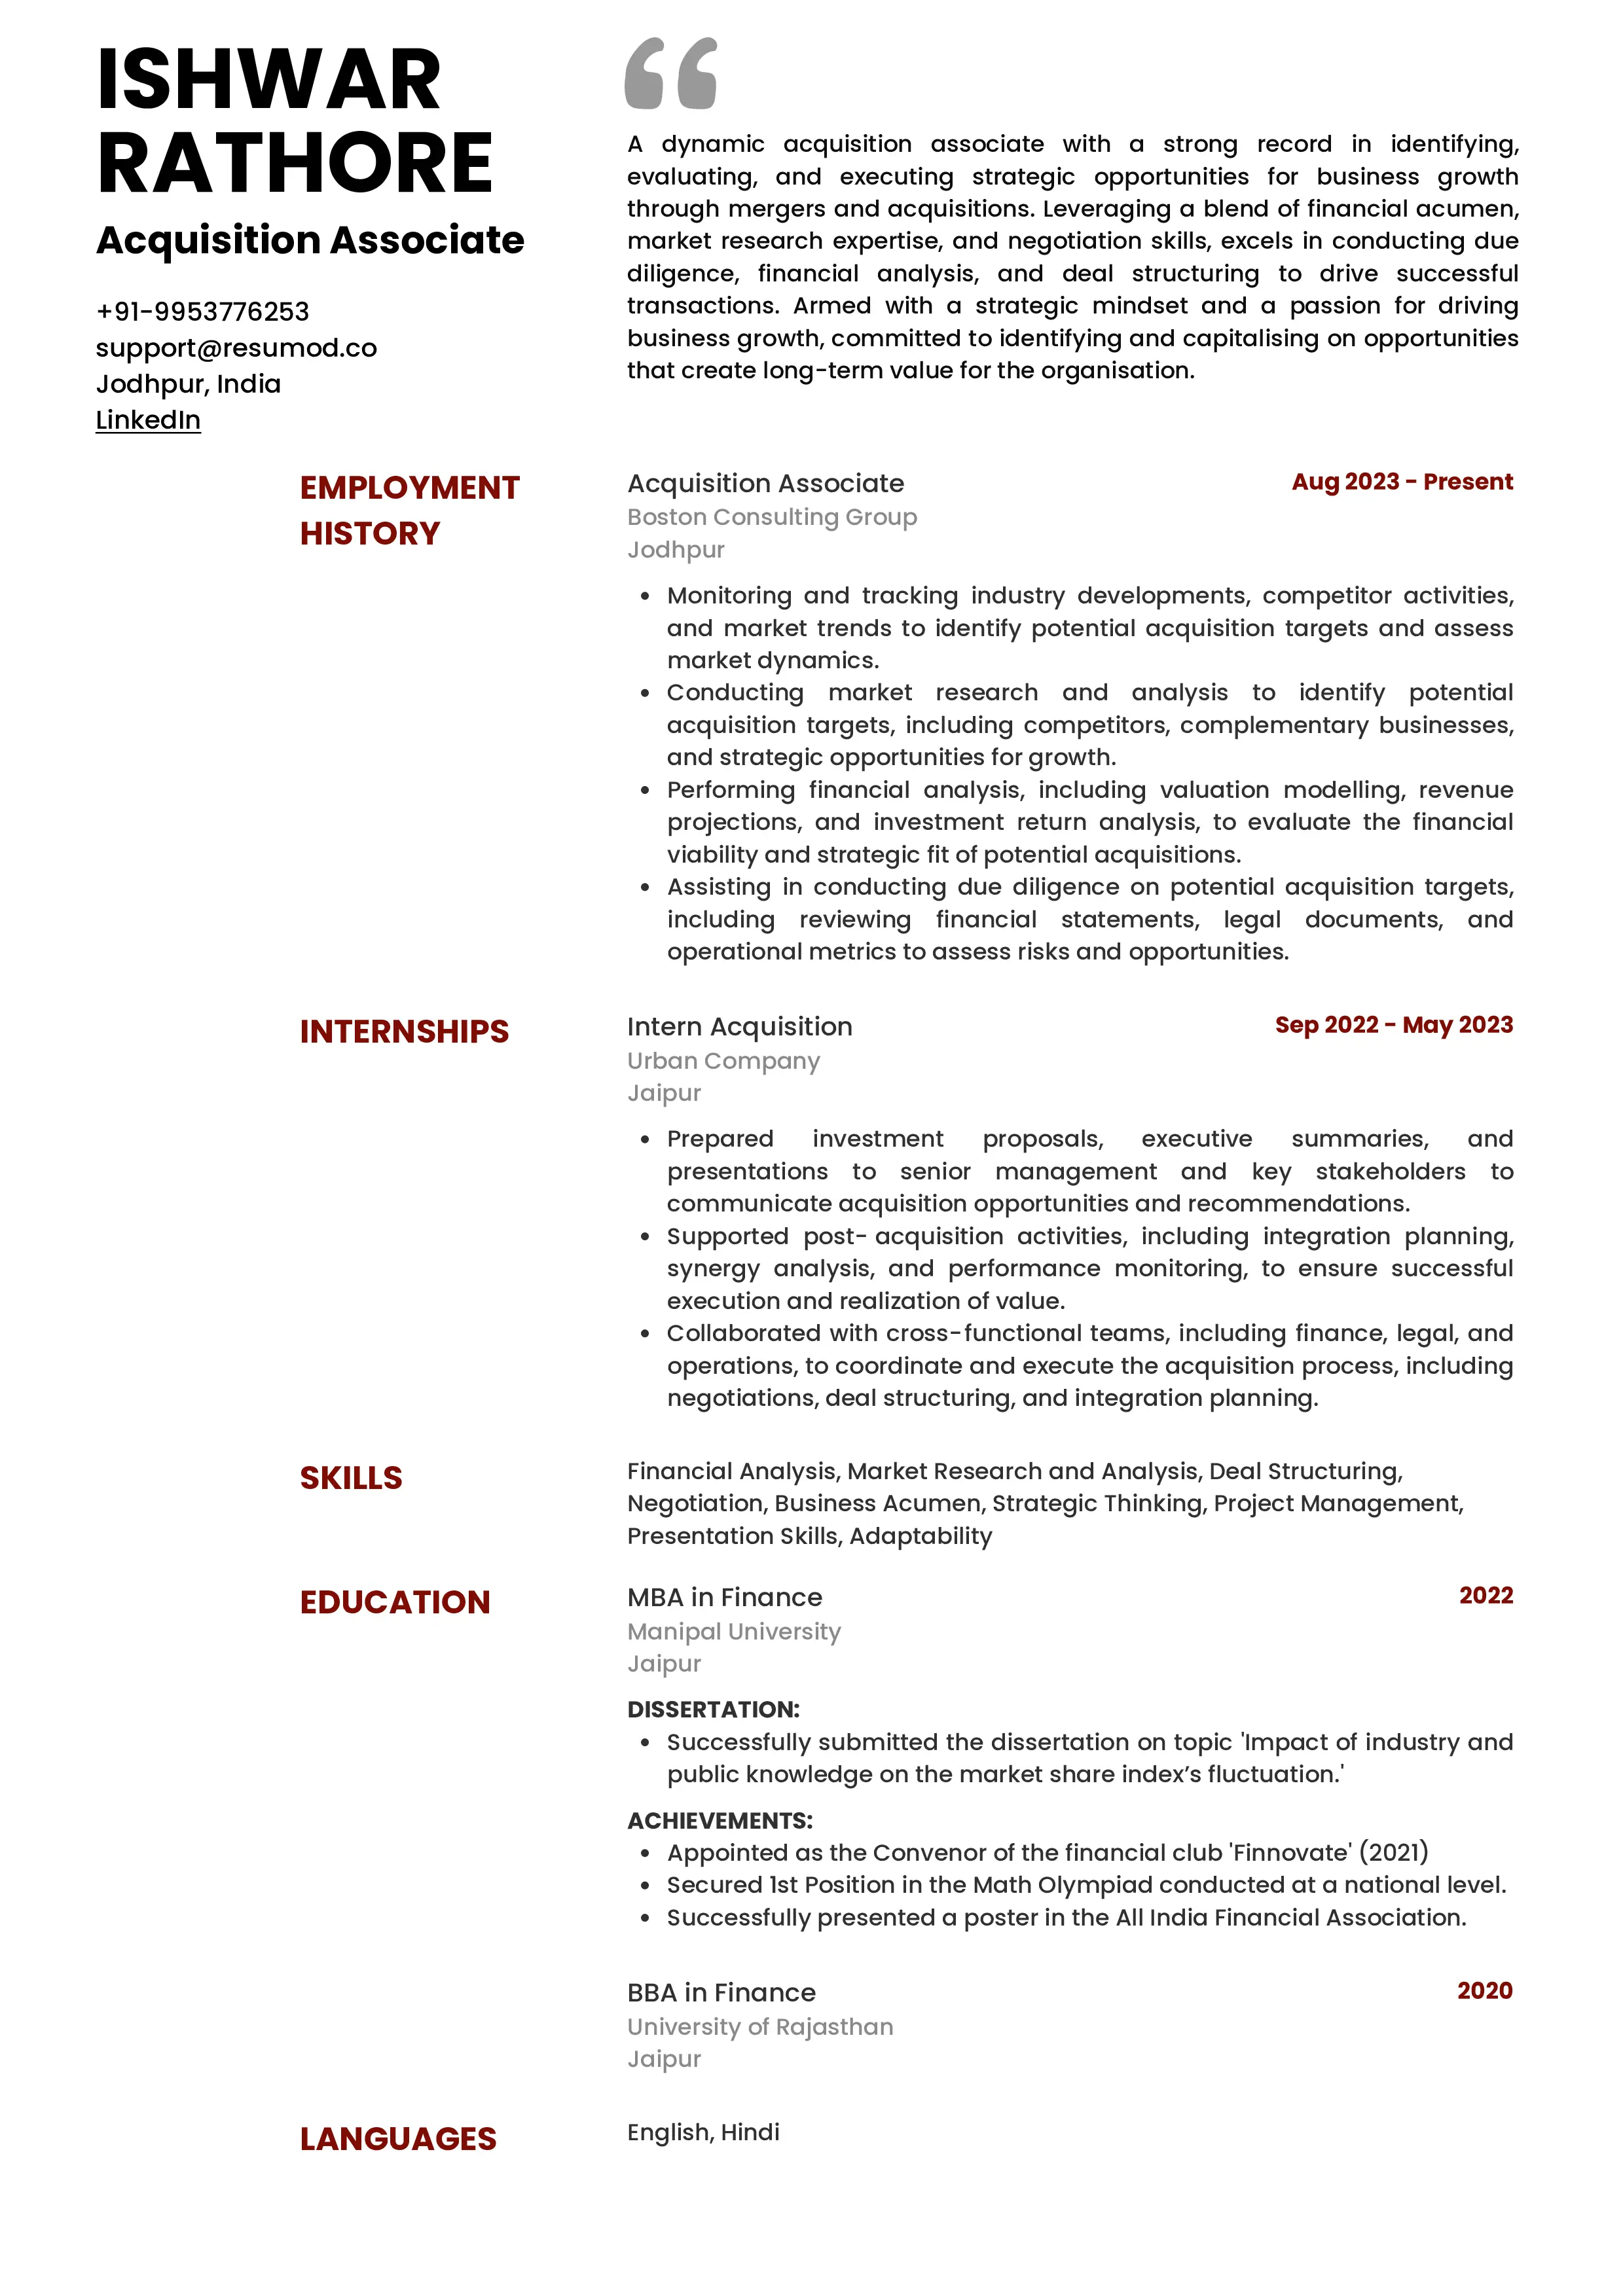 Sample Resume of Acquisition Associate | Free Resume Templates & Samples on Resumod.co